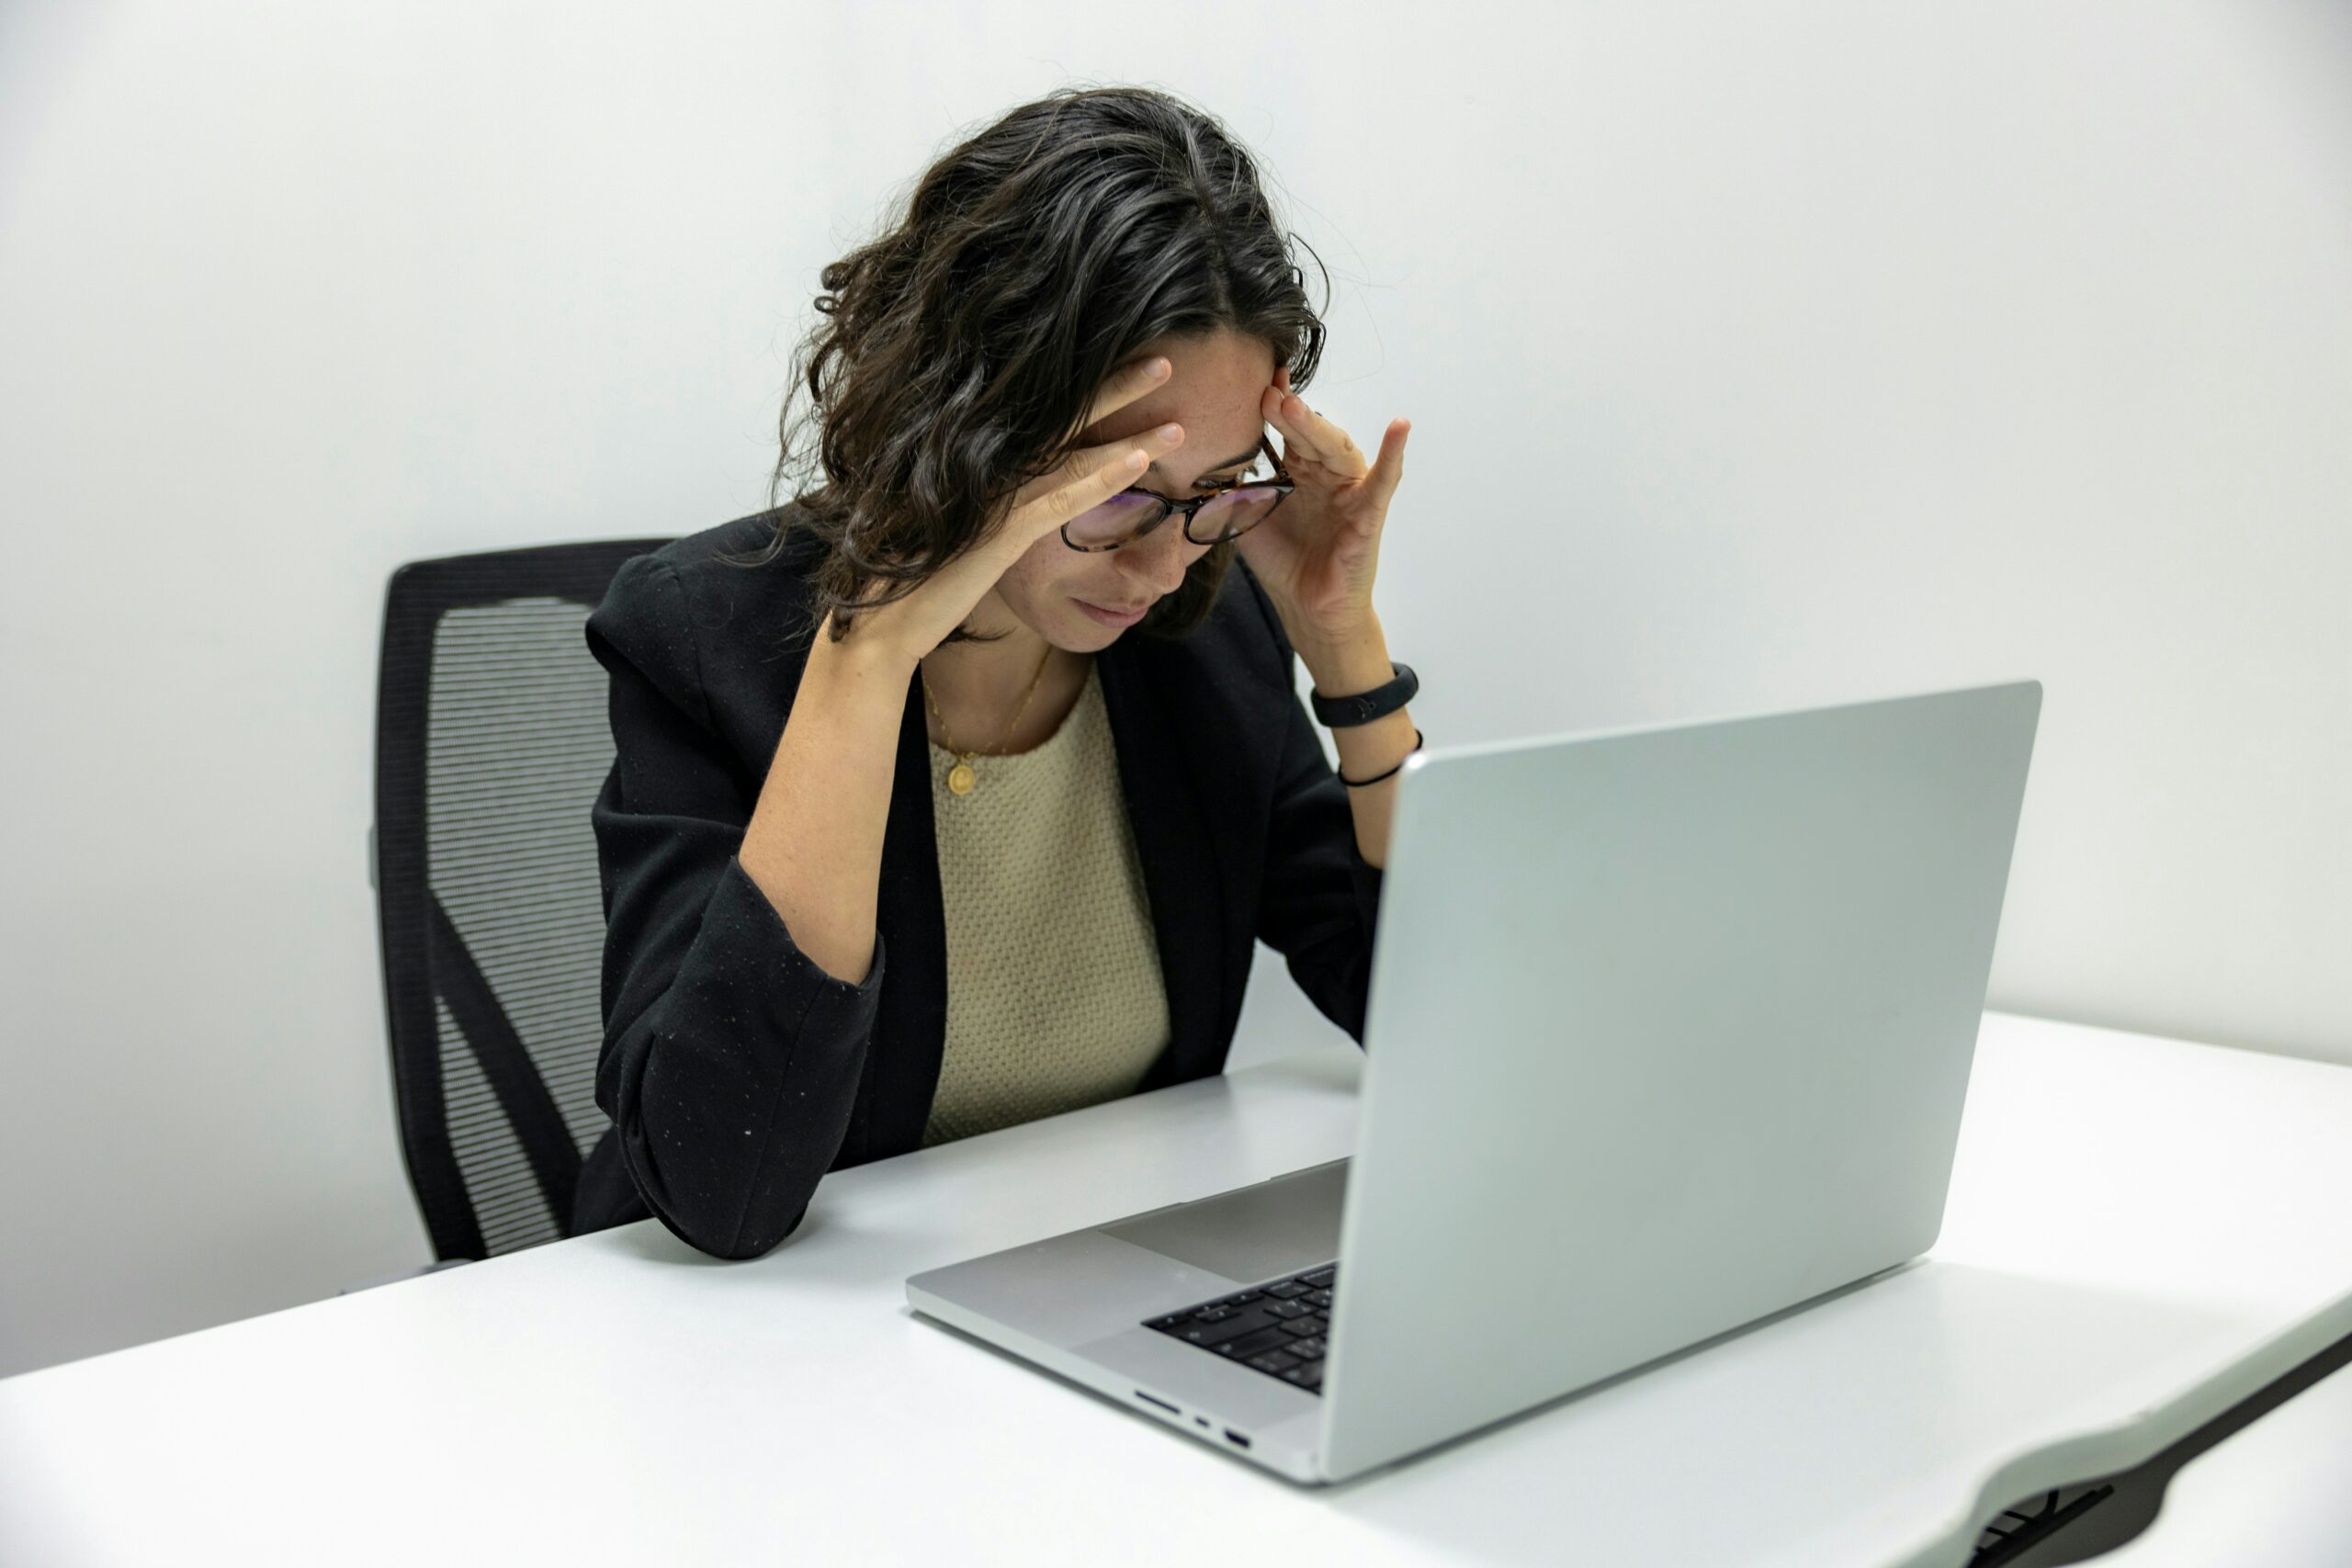 Woman places her head in her hands in front of her computer and appears stressed at work.